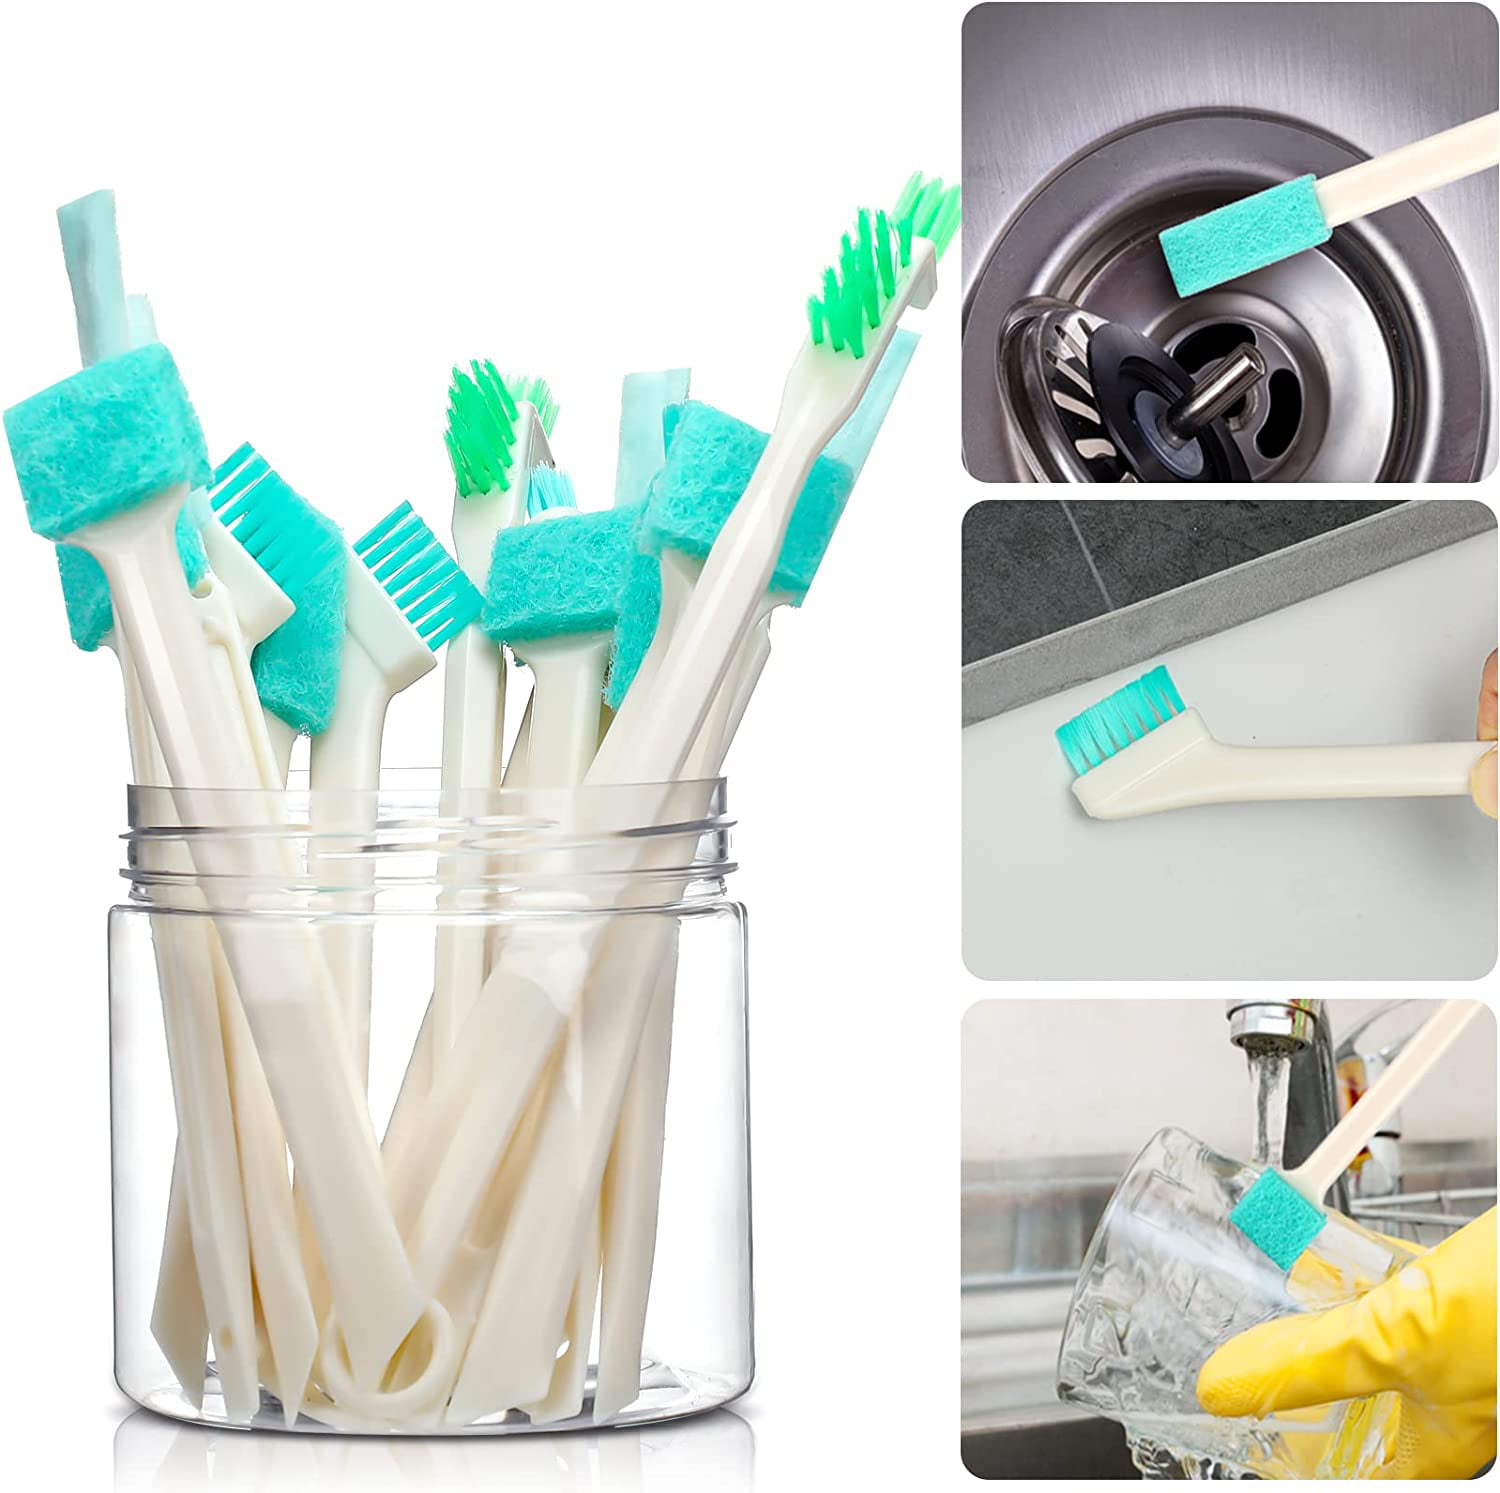  Small Cleaning Brushes for Small Spaces,Detail Crevice Cleaning  Tools Set for Window Track Groove Humidifier Keyboard,Tiny Household Deep  Scrub Brush for Holes Corner Groove Bottle Tight Space-16Pcs : Home &  Kitchen